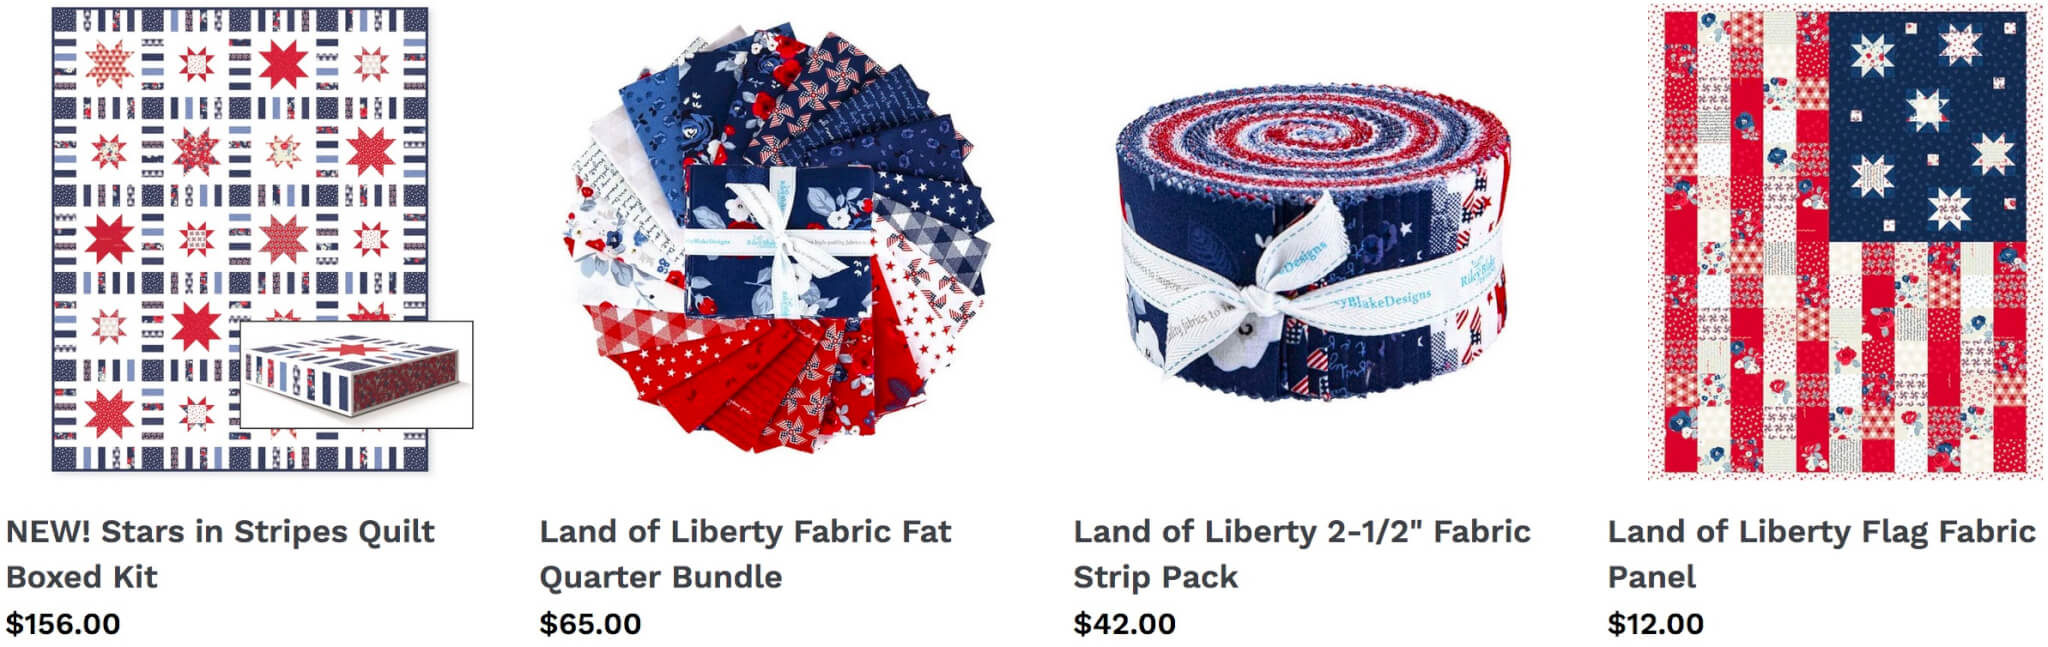 New! Land of Liberty Cotton Quilting Fabrics by Riley Blake Designs Available at Nancy Zieman Productions at ShopNZP.com